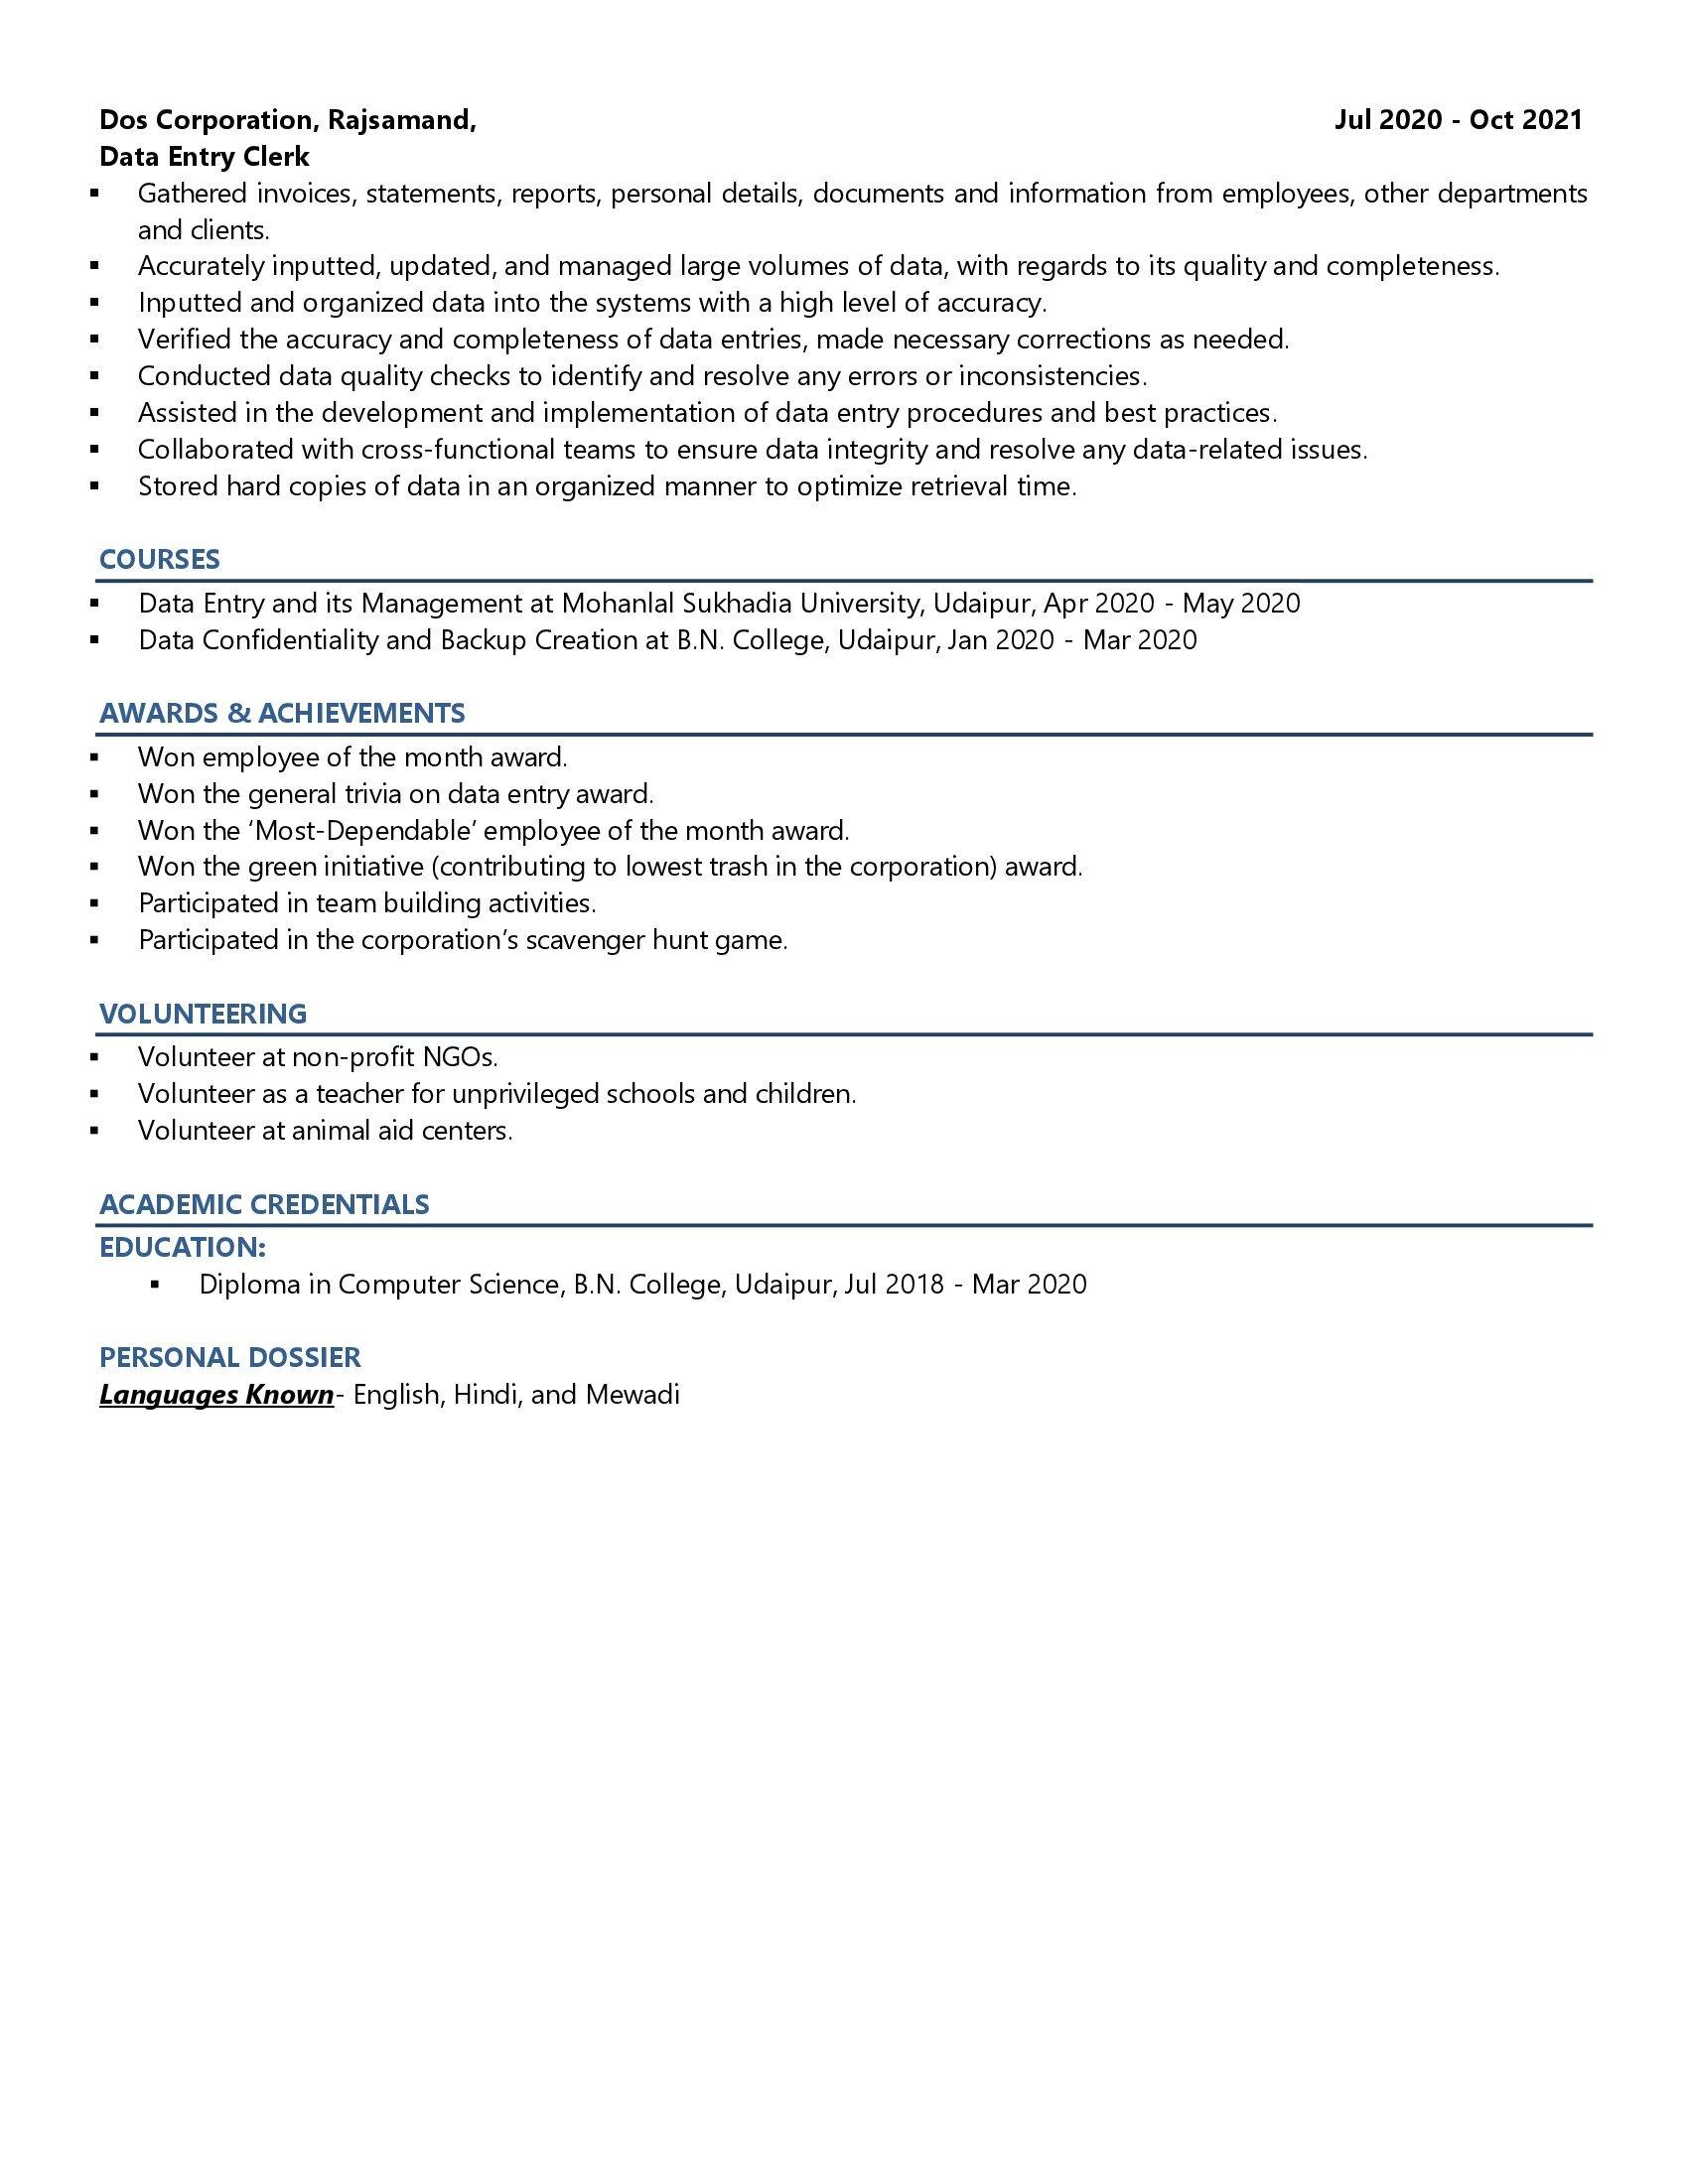 Data Entry Operator - Resume Example & Template